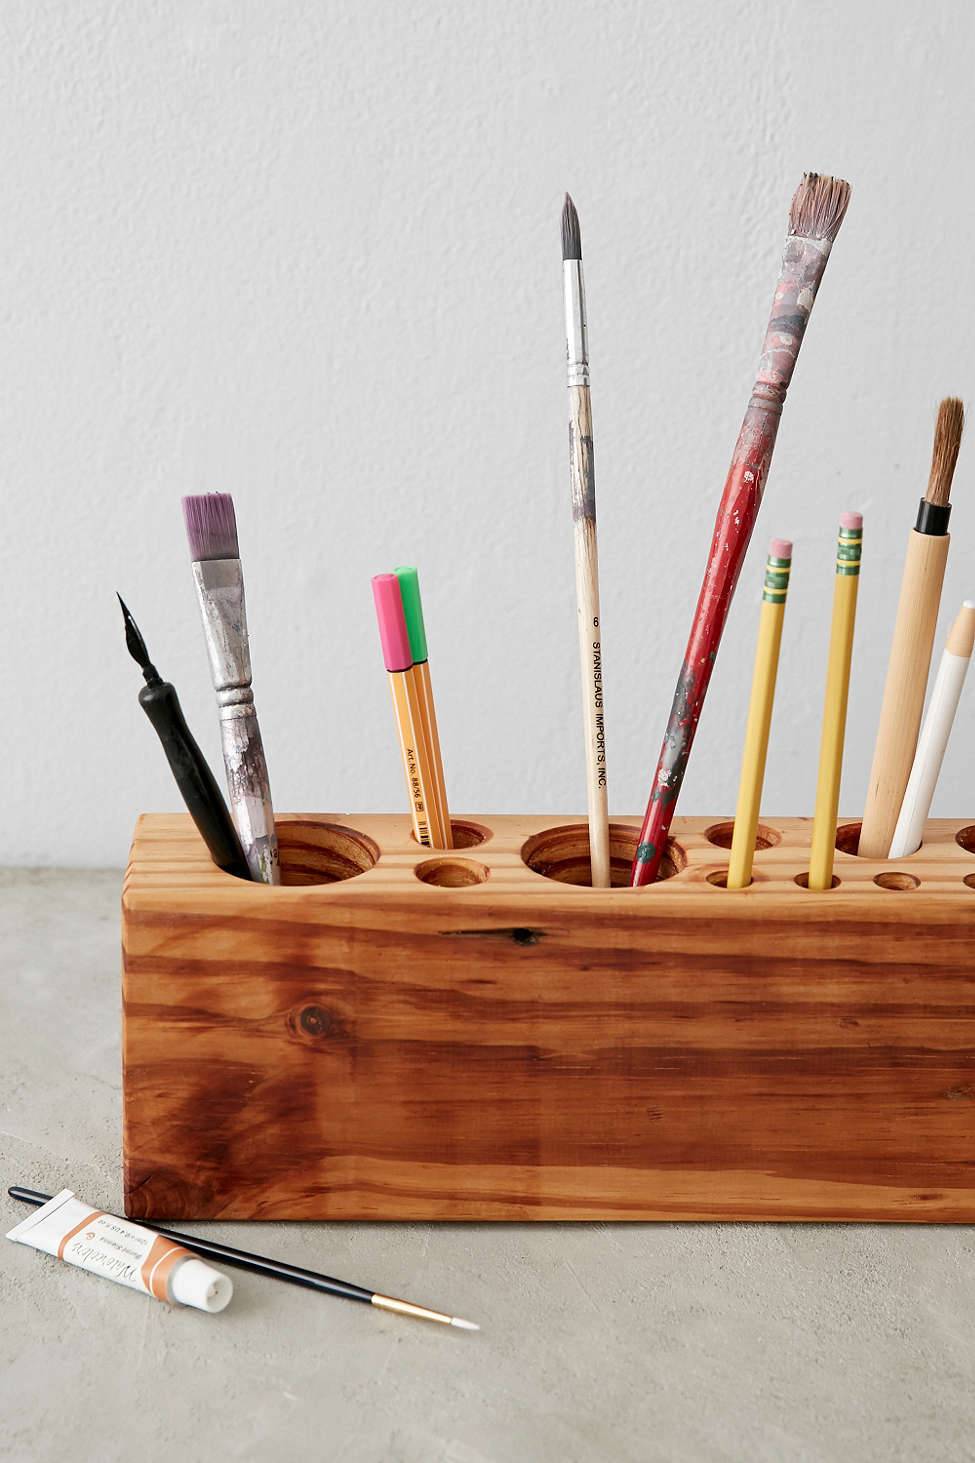 Paintbrushes are shown in a wooden container.